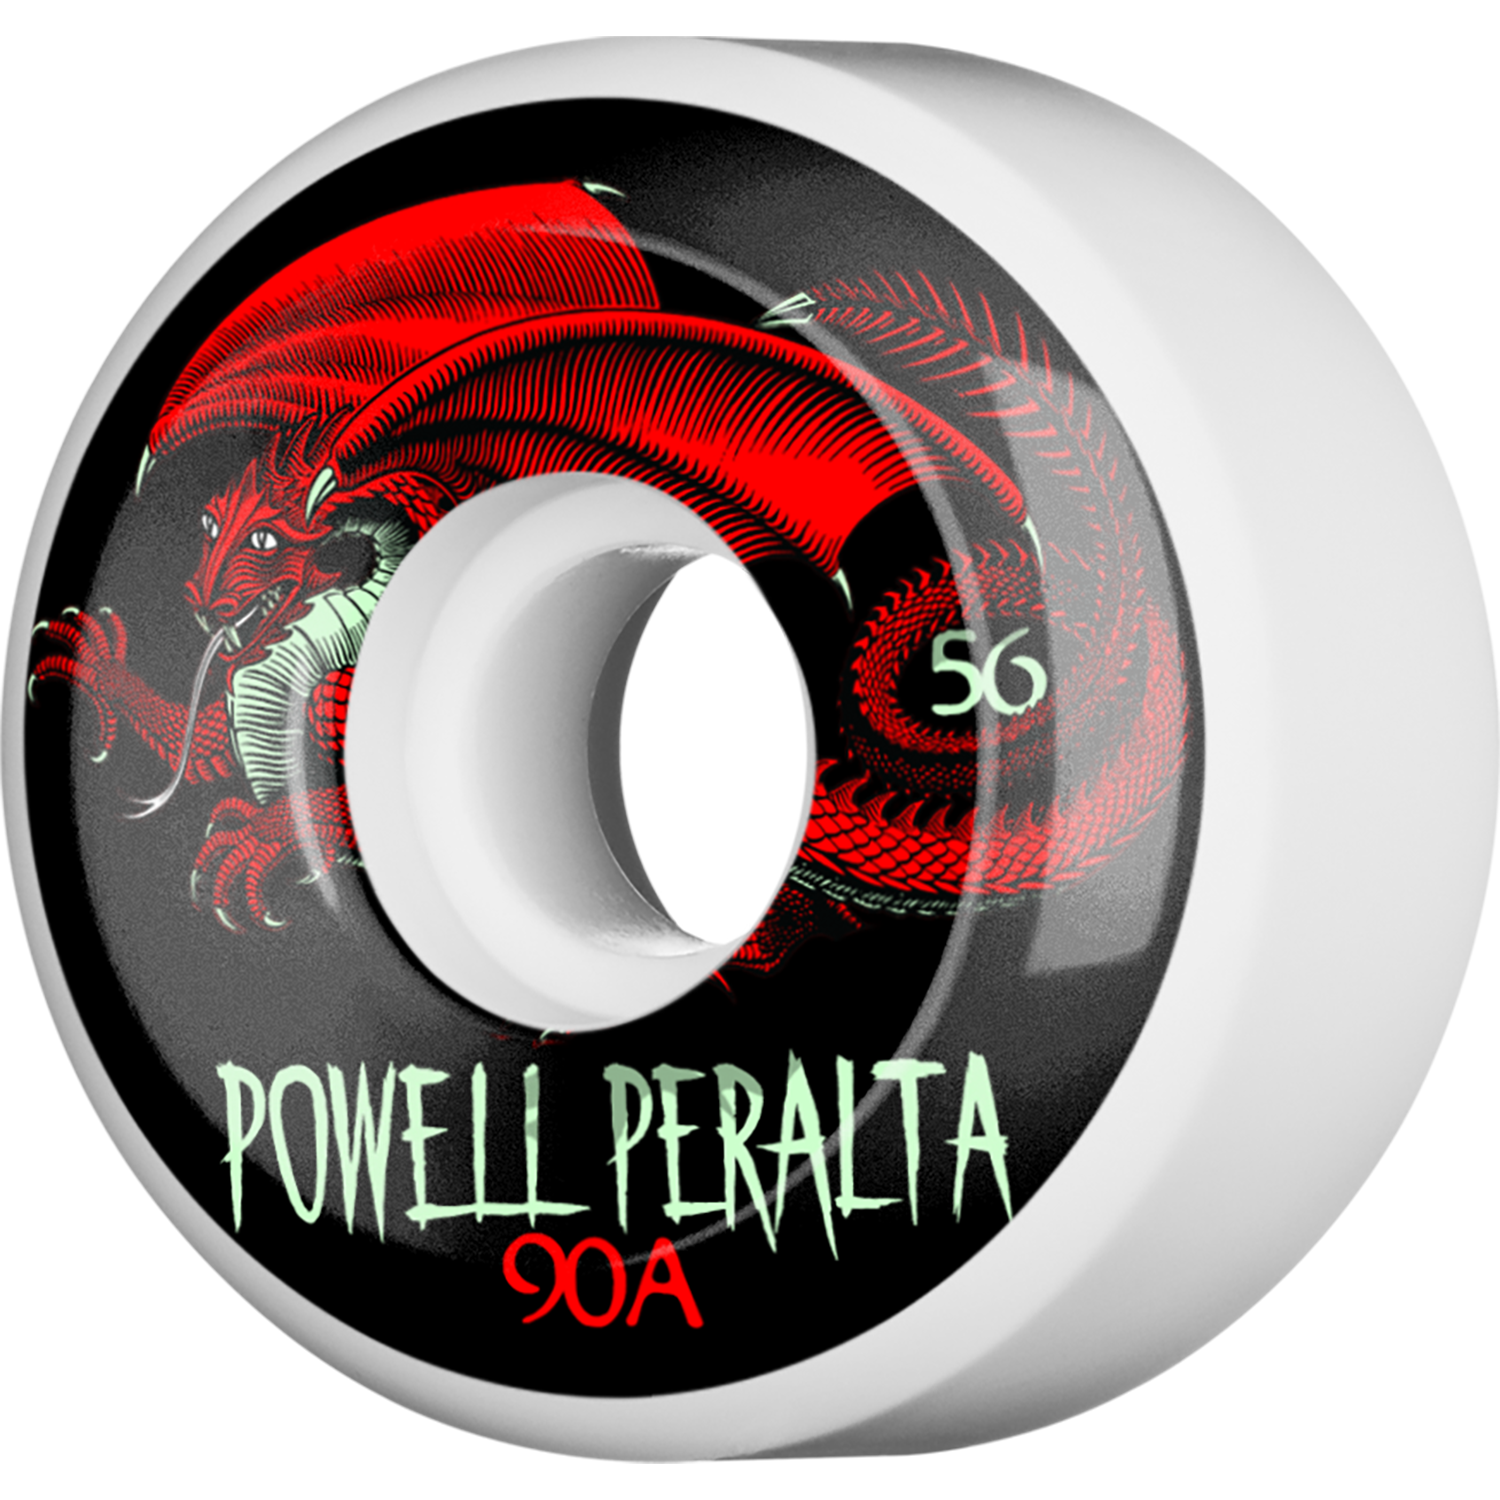 Powell Peralta Oval Dragon 4 56mm 90a White W/Black/Red Skateboard Wheels (Set of 4)